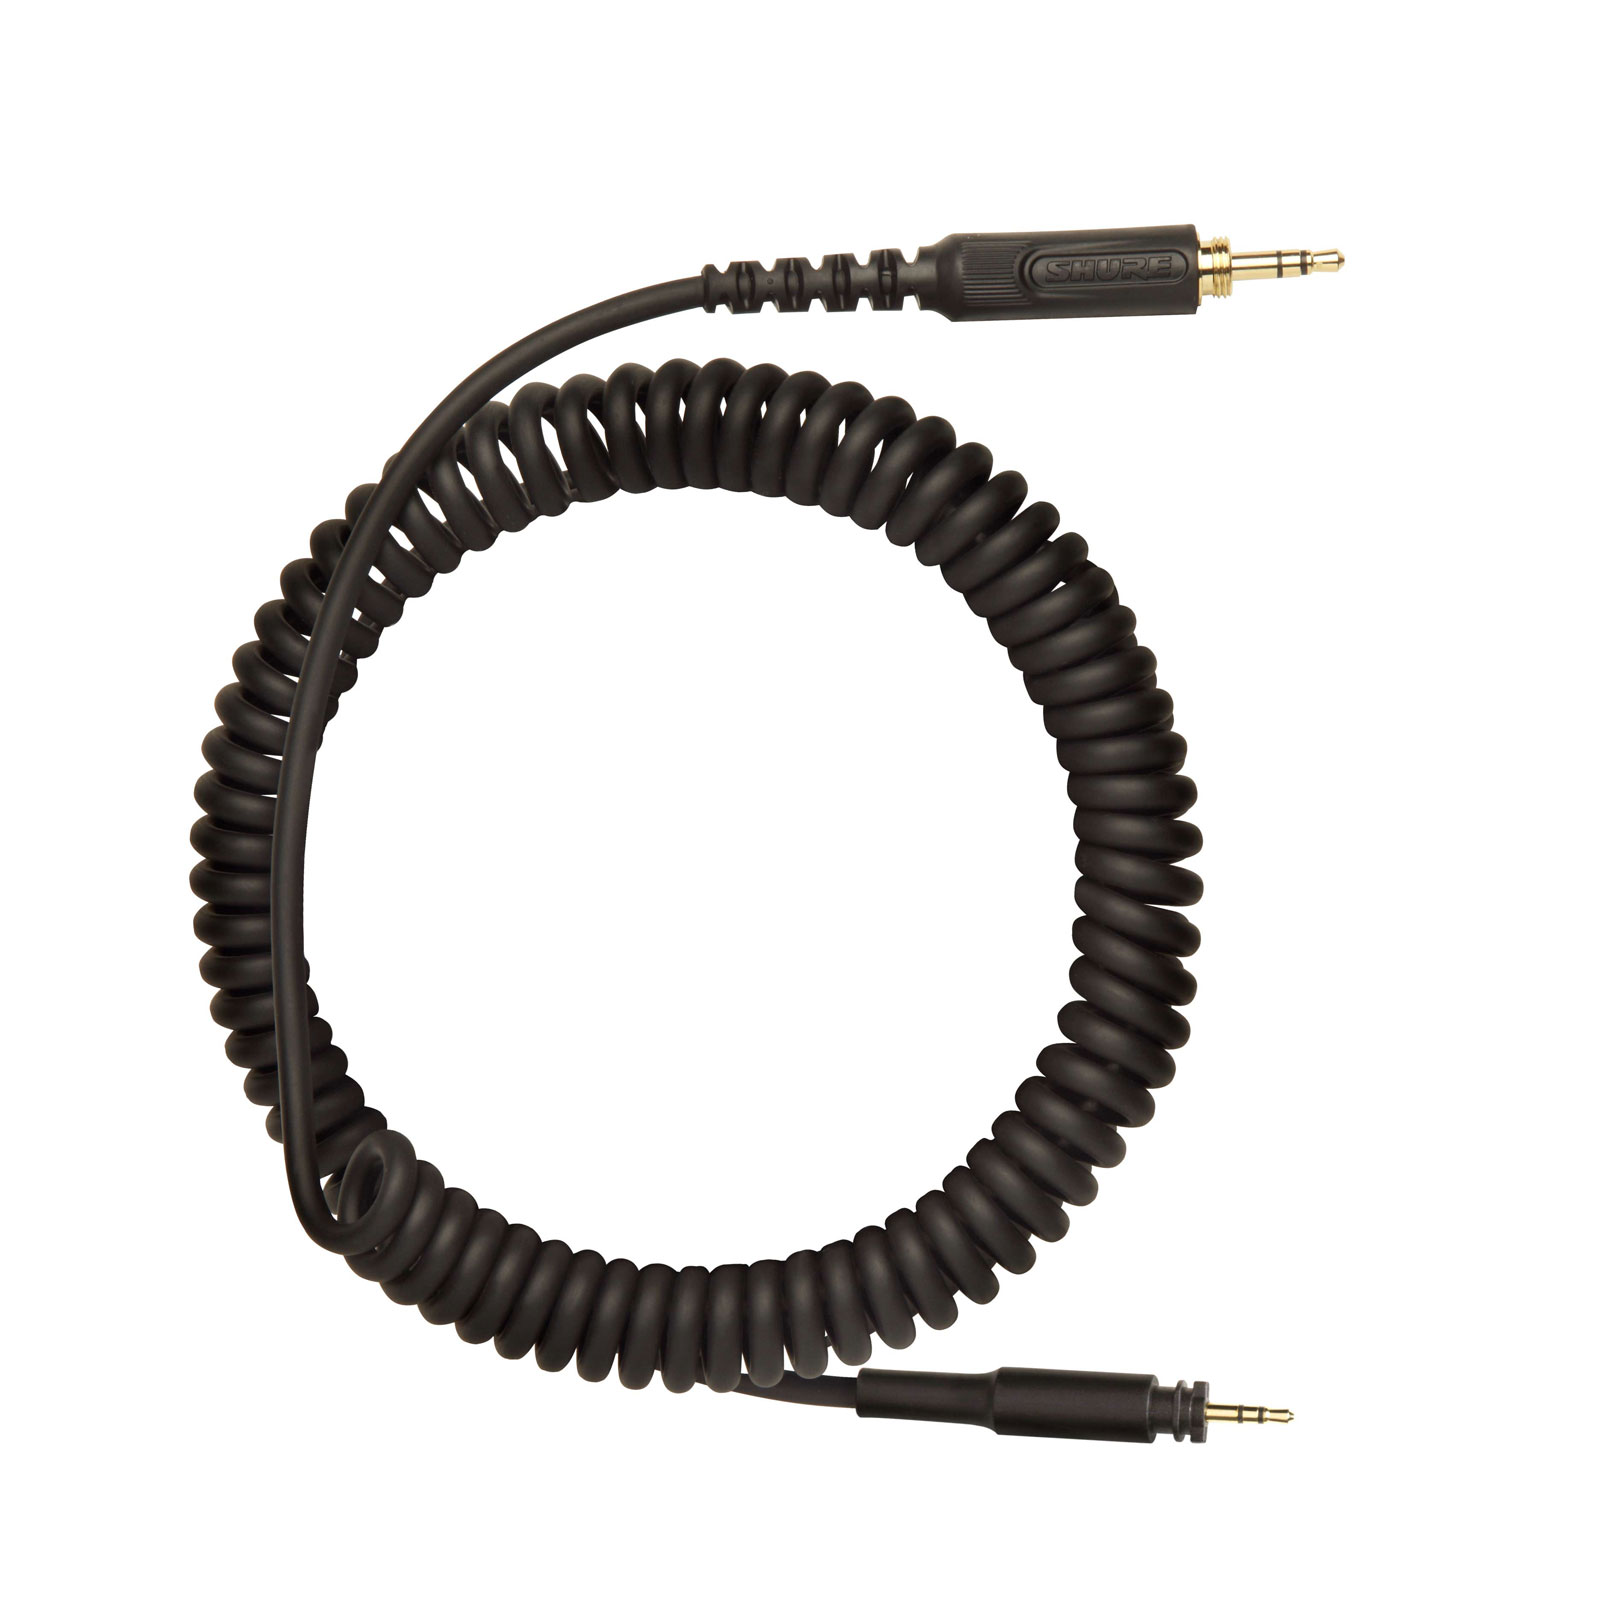 SHURE DETACHABLE SPIRAL CABLE FOR SRH440-840